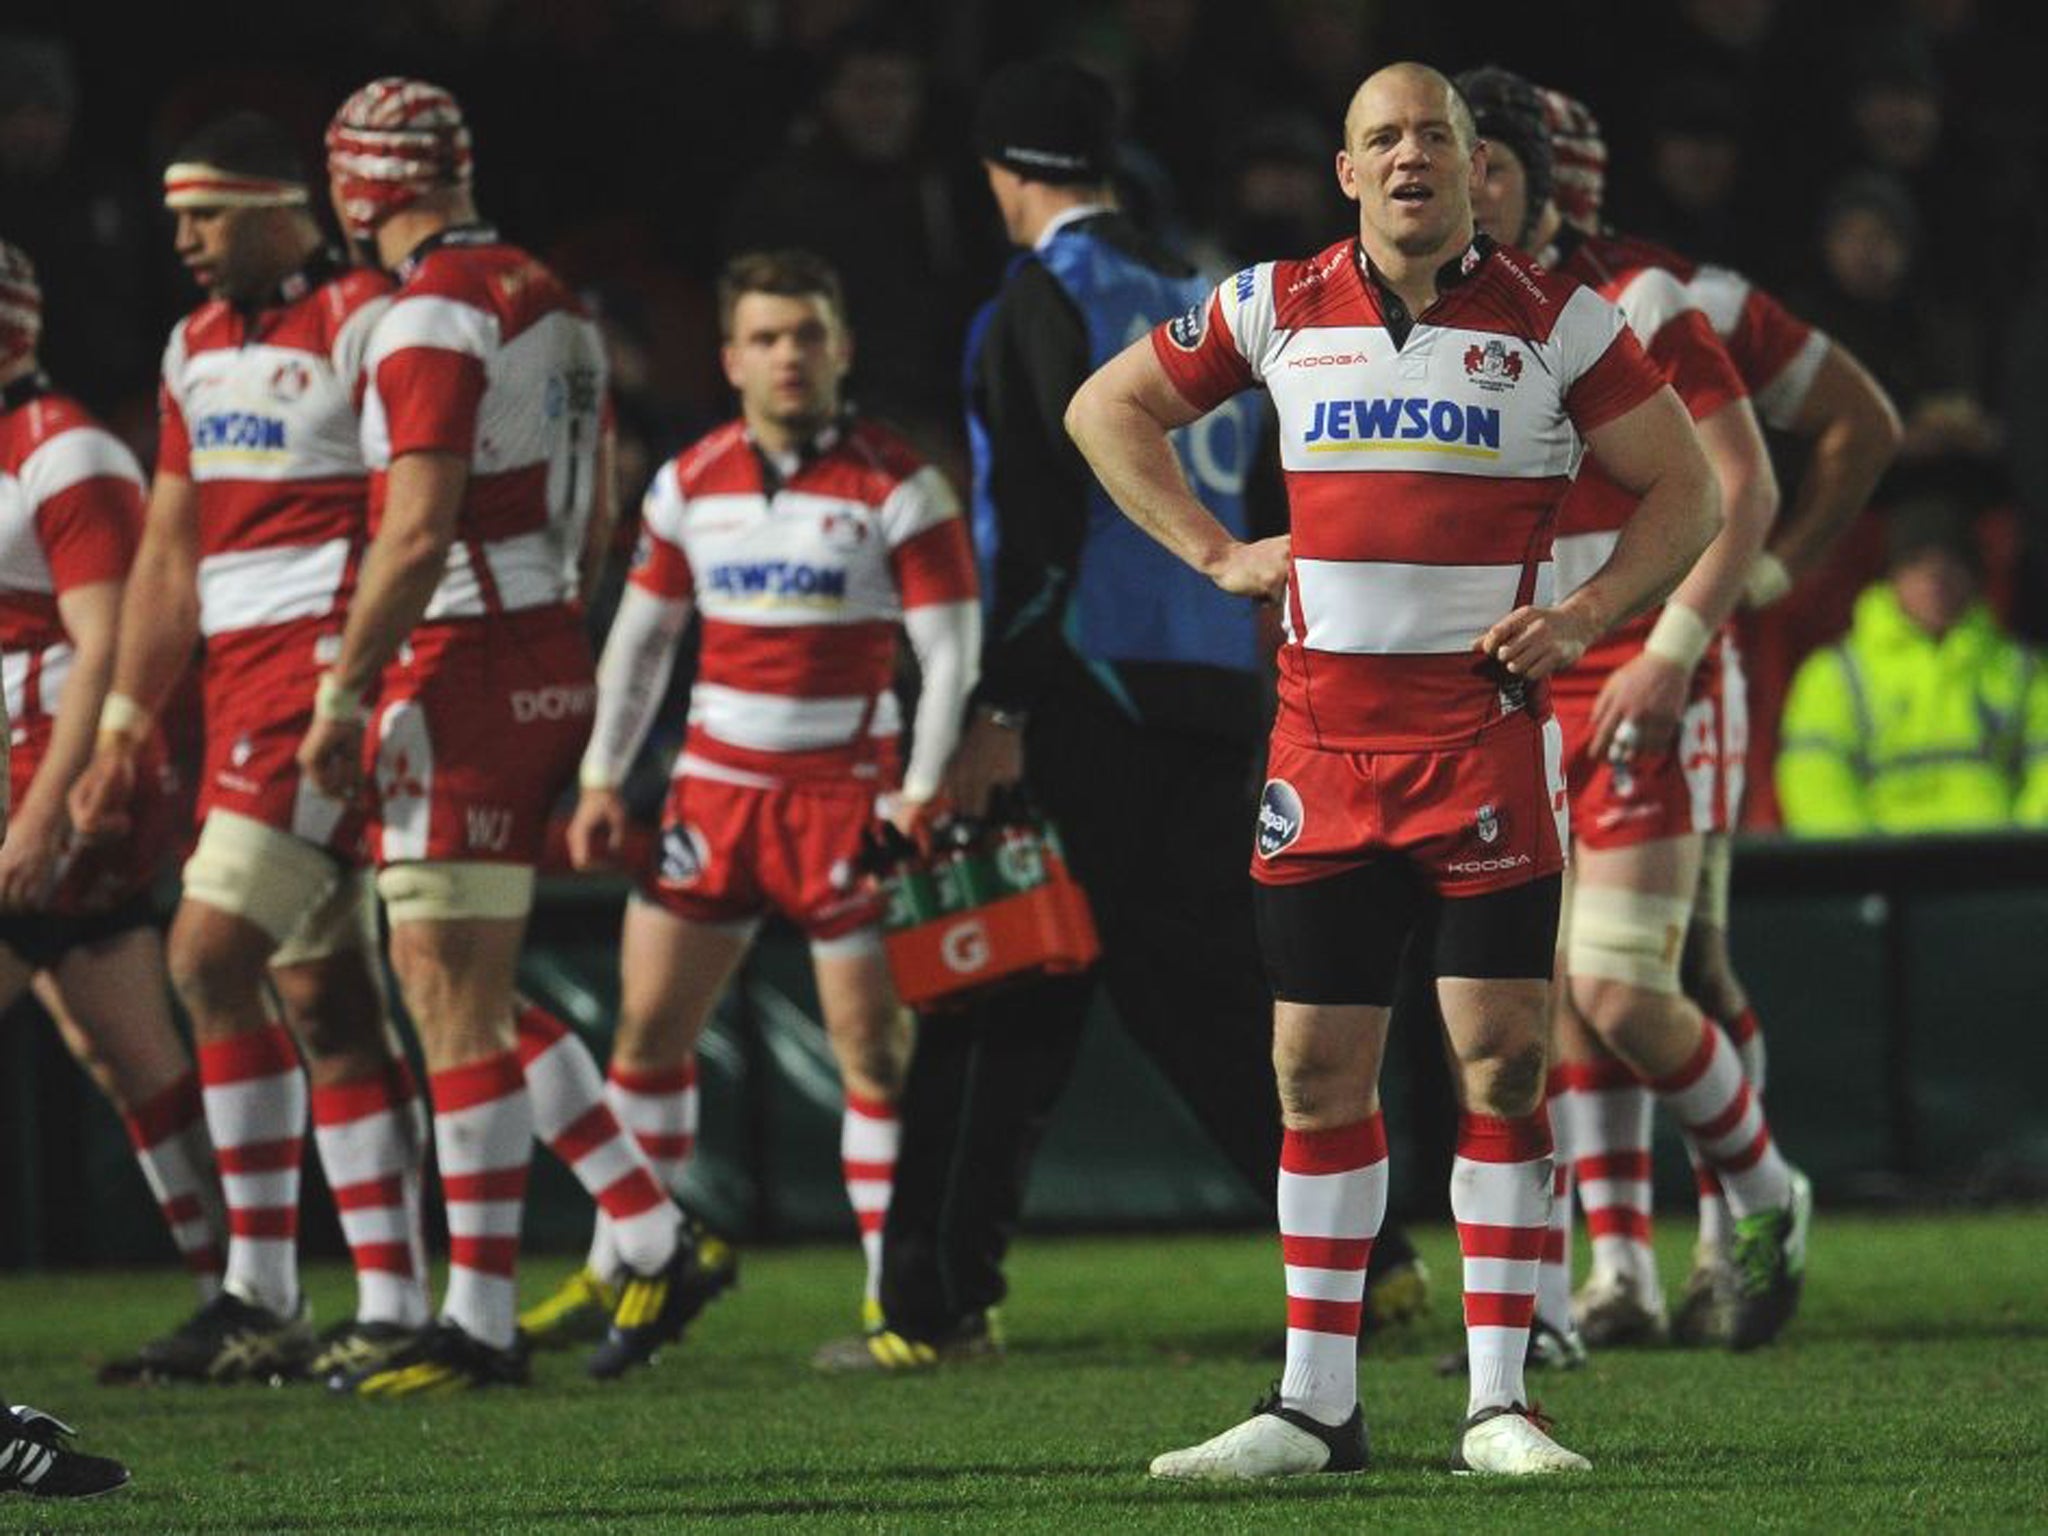 Mike Tindall ended up dejected despite scoring an early try